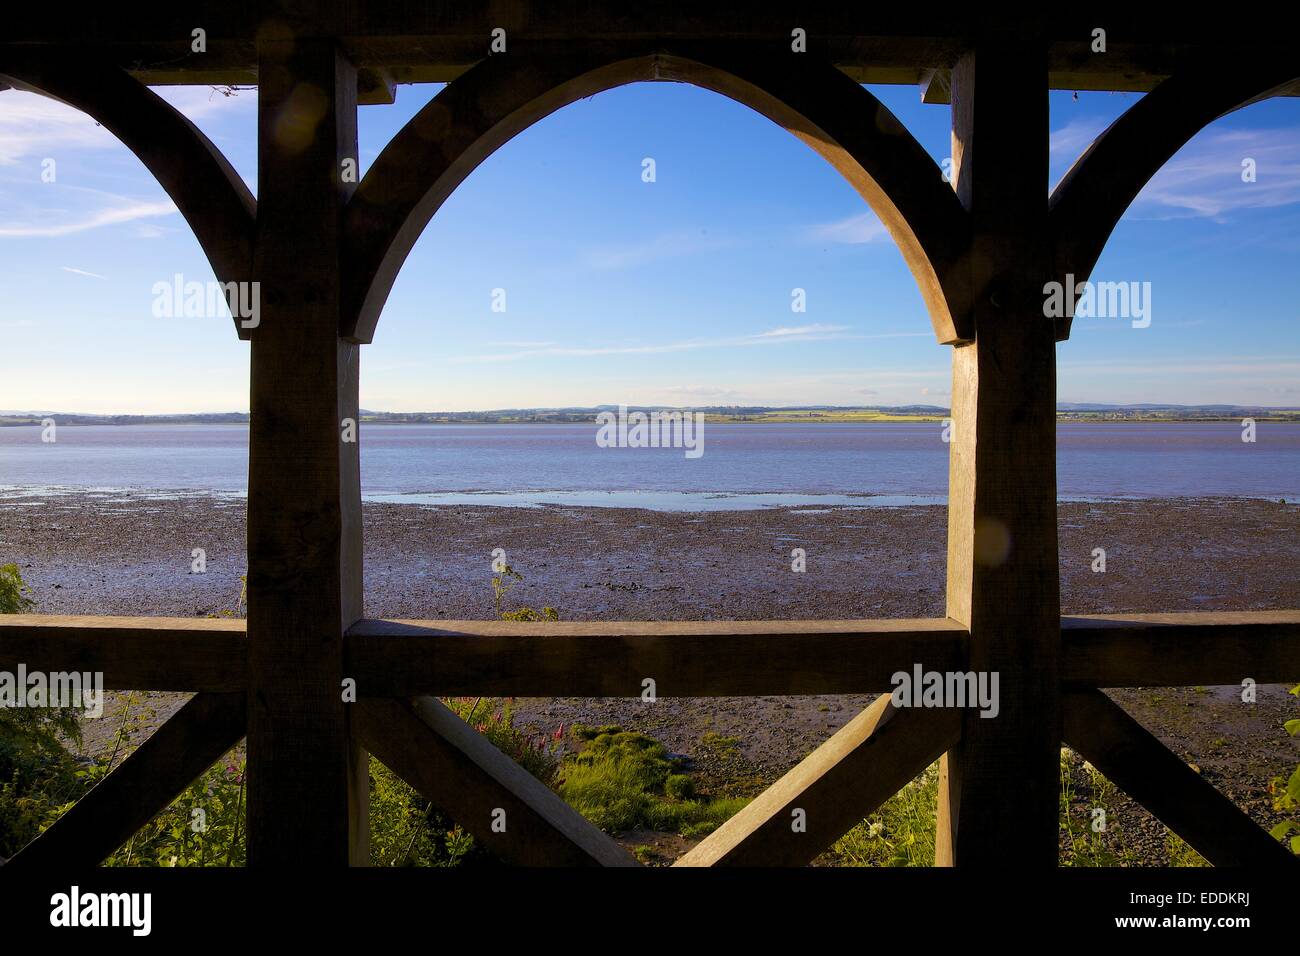 View from Summerhouse at theTerminus of Hadrian's Wall, Bowness-on-Solway Cumbria England UK. Stock Photo